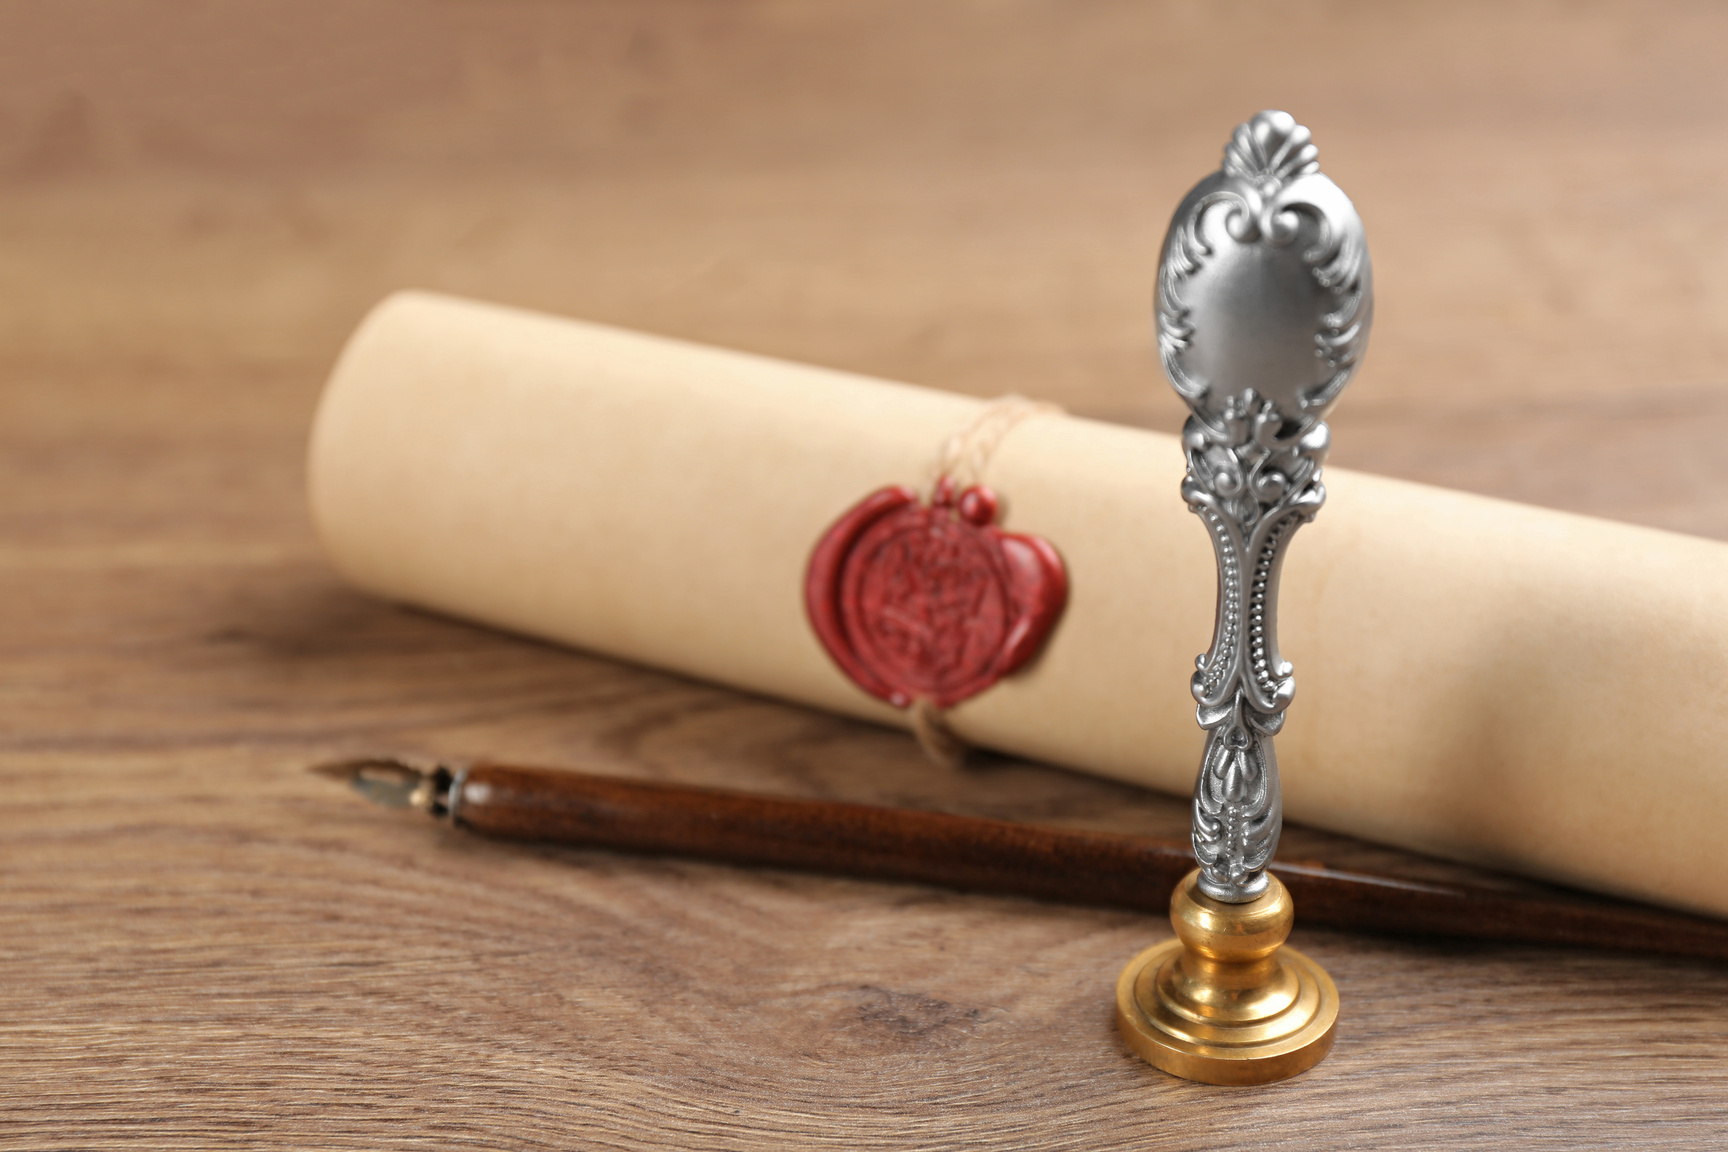 Notary's Public Pen and Document with Wax Stamp on Wooden Table, Closeup